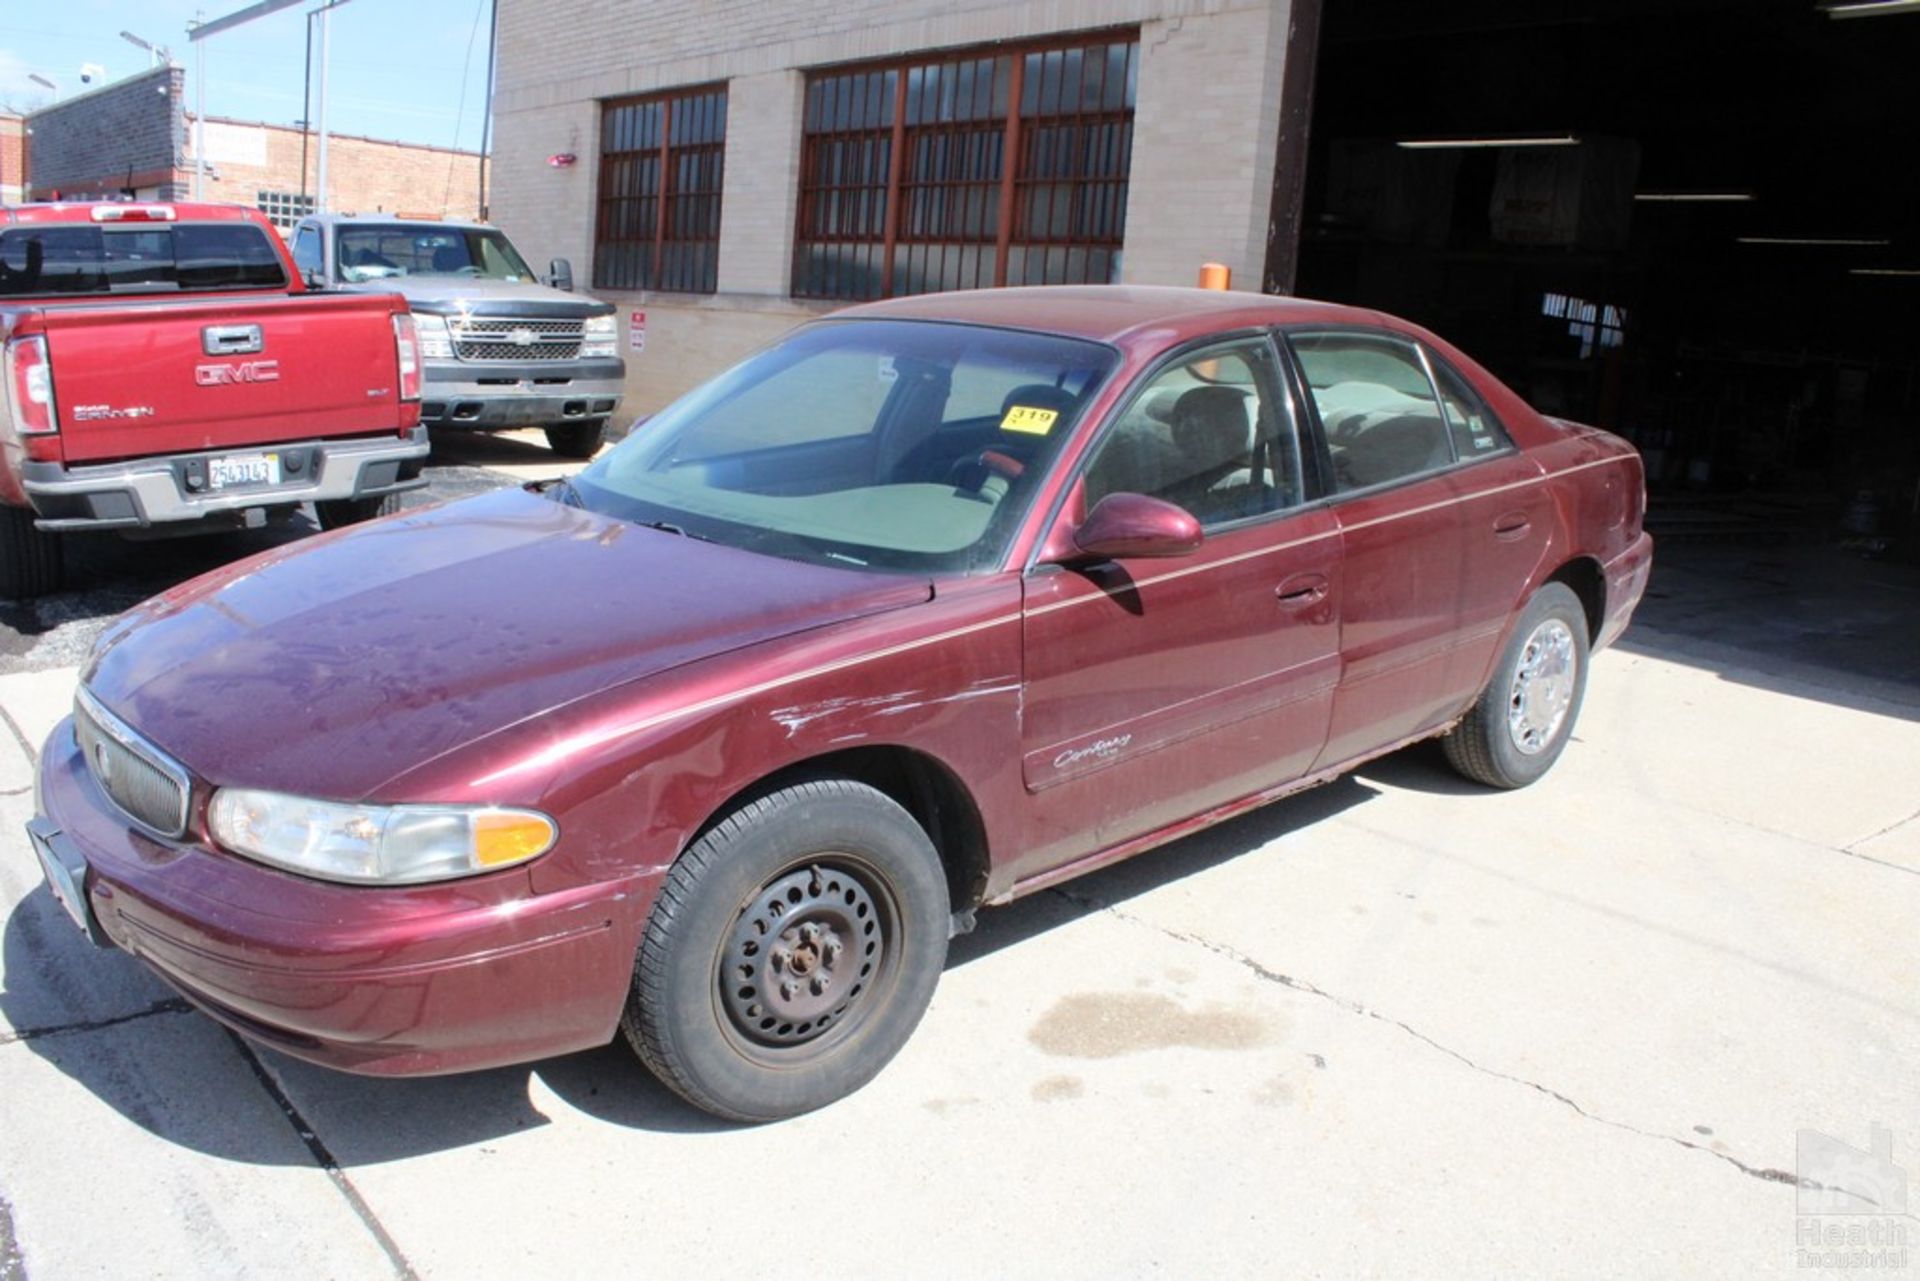 2001 BUICK MODEL CENTURY AUTOMOBILE, VIN: 2G4AS52J511184800, AUTOMATIC TRANSMISSION, CAN'T READ